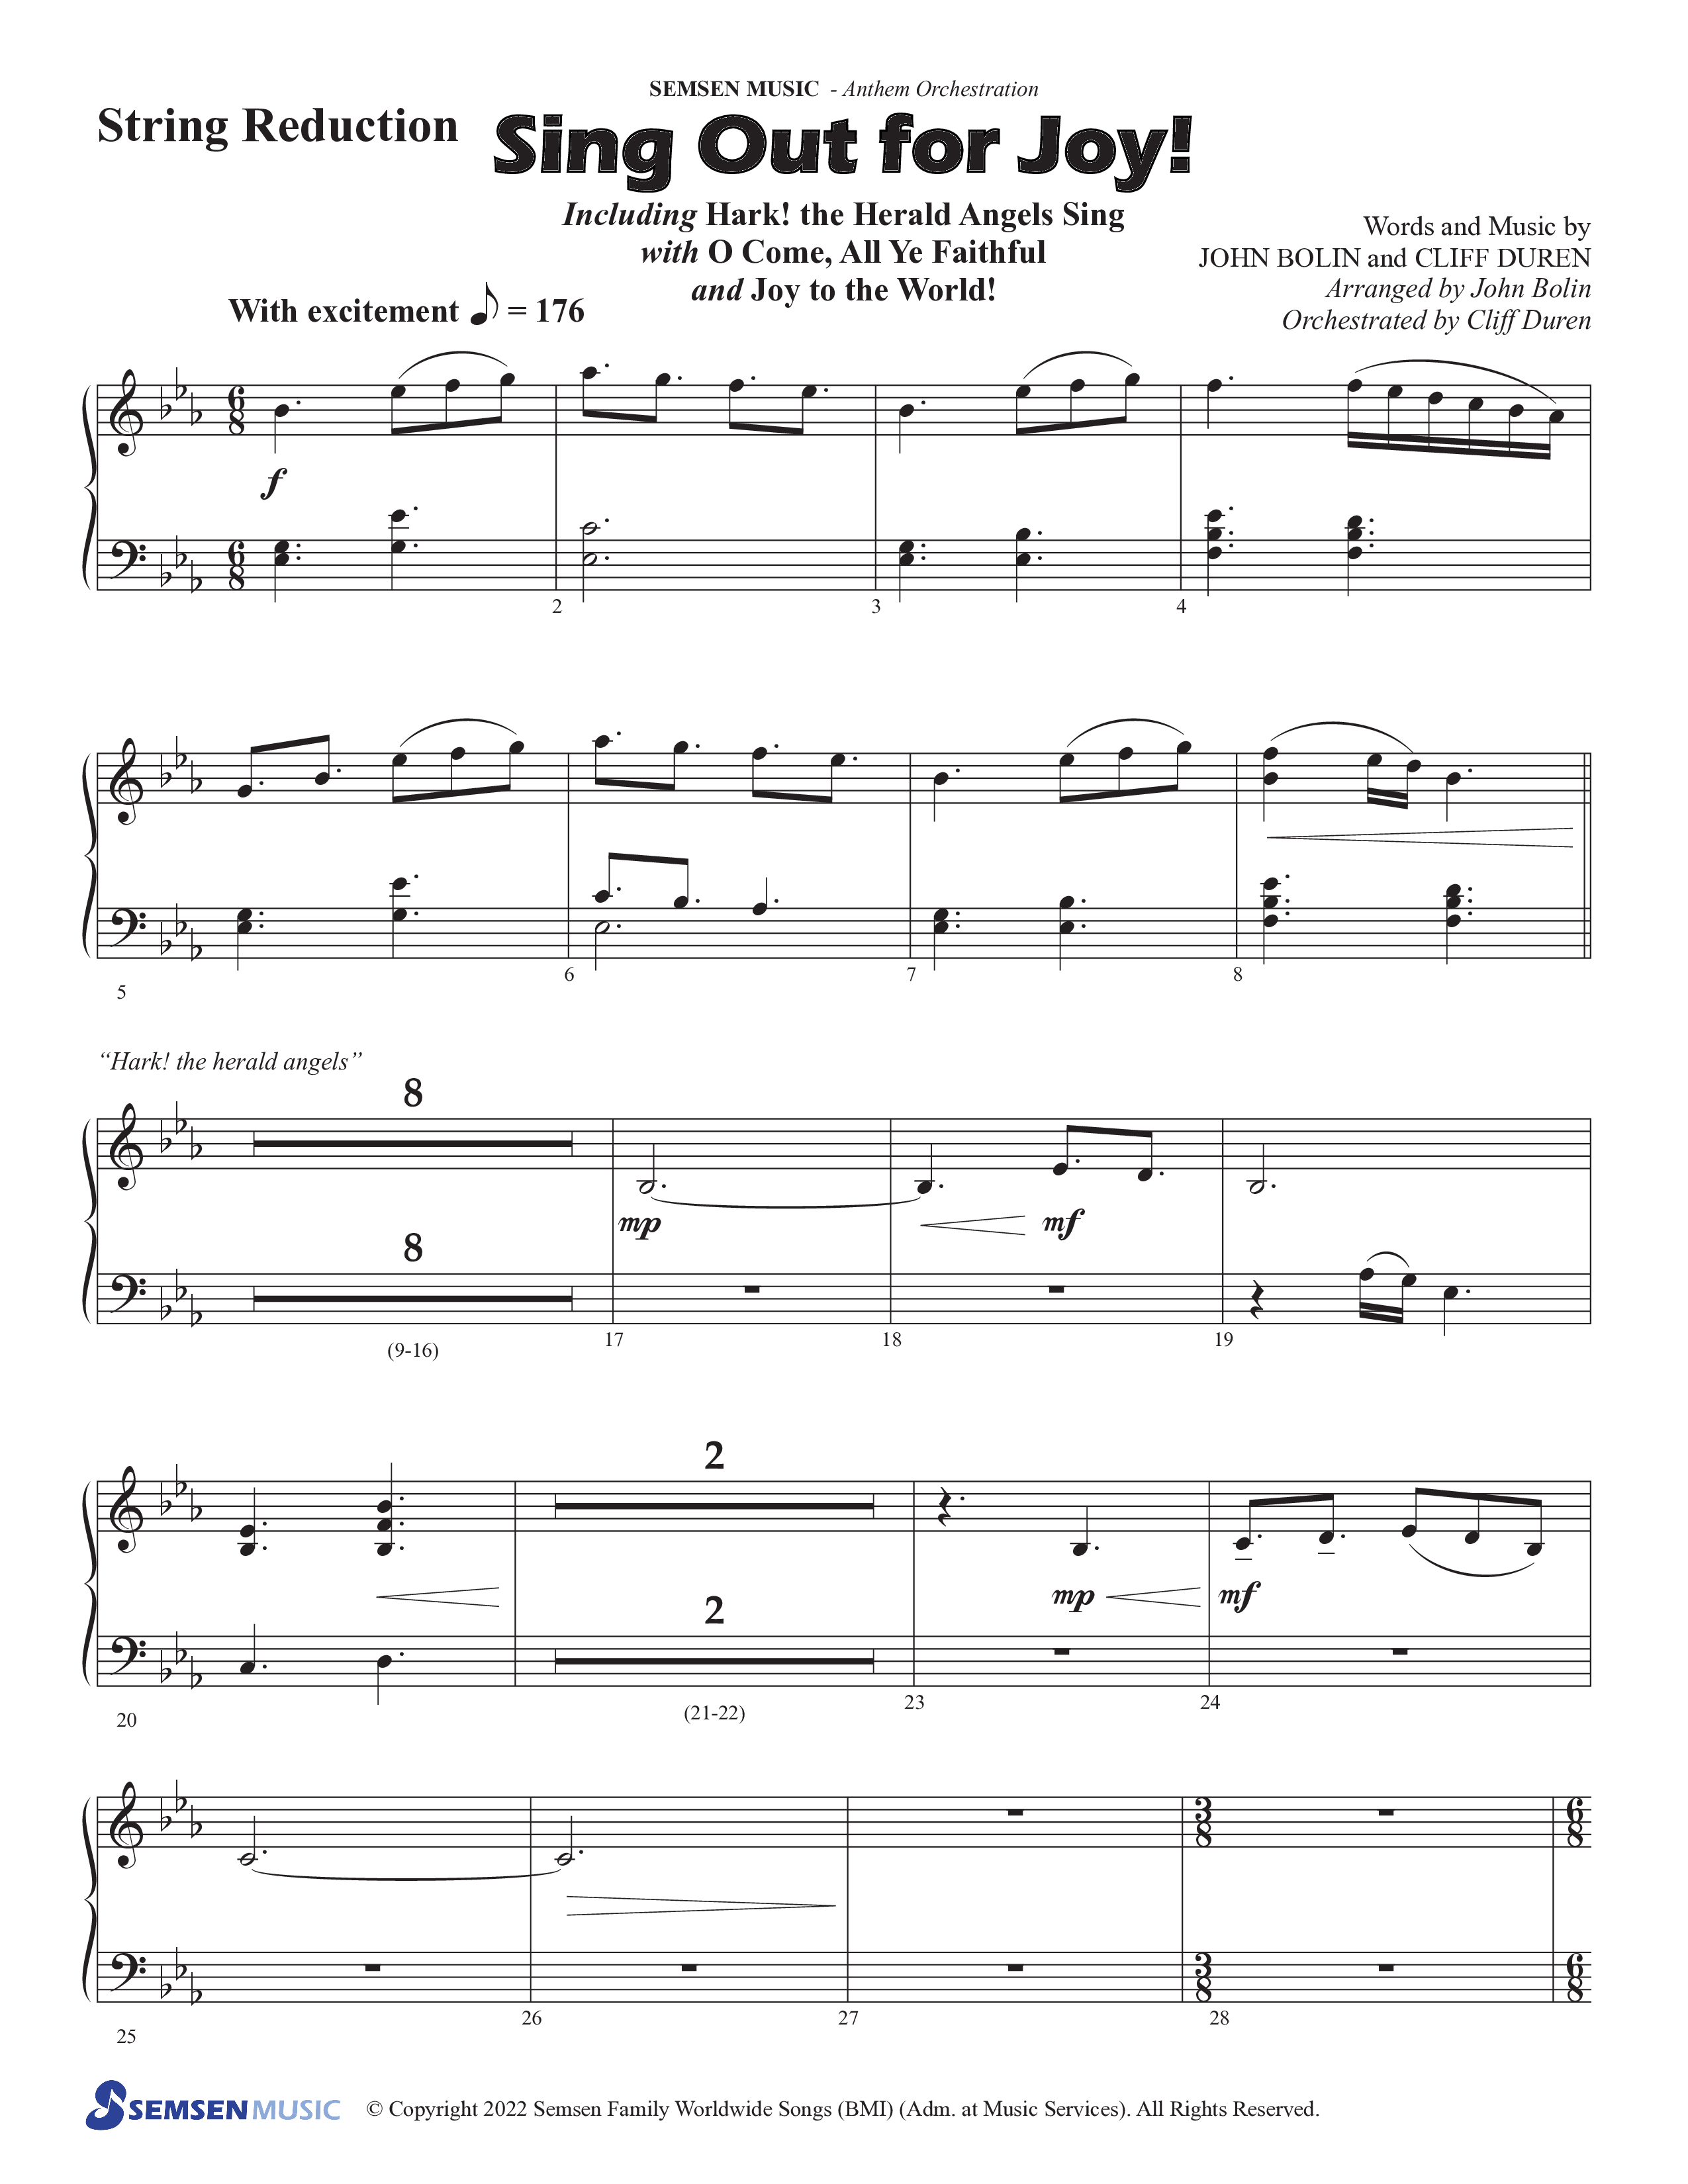 Sing Out For Joy (Choral Anthem SATB) String Reduction (Semsen Music / Arr. John Bolin / Orch. Cliff Duren)